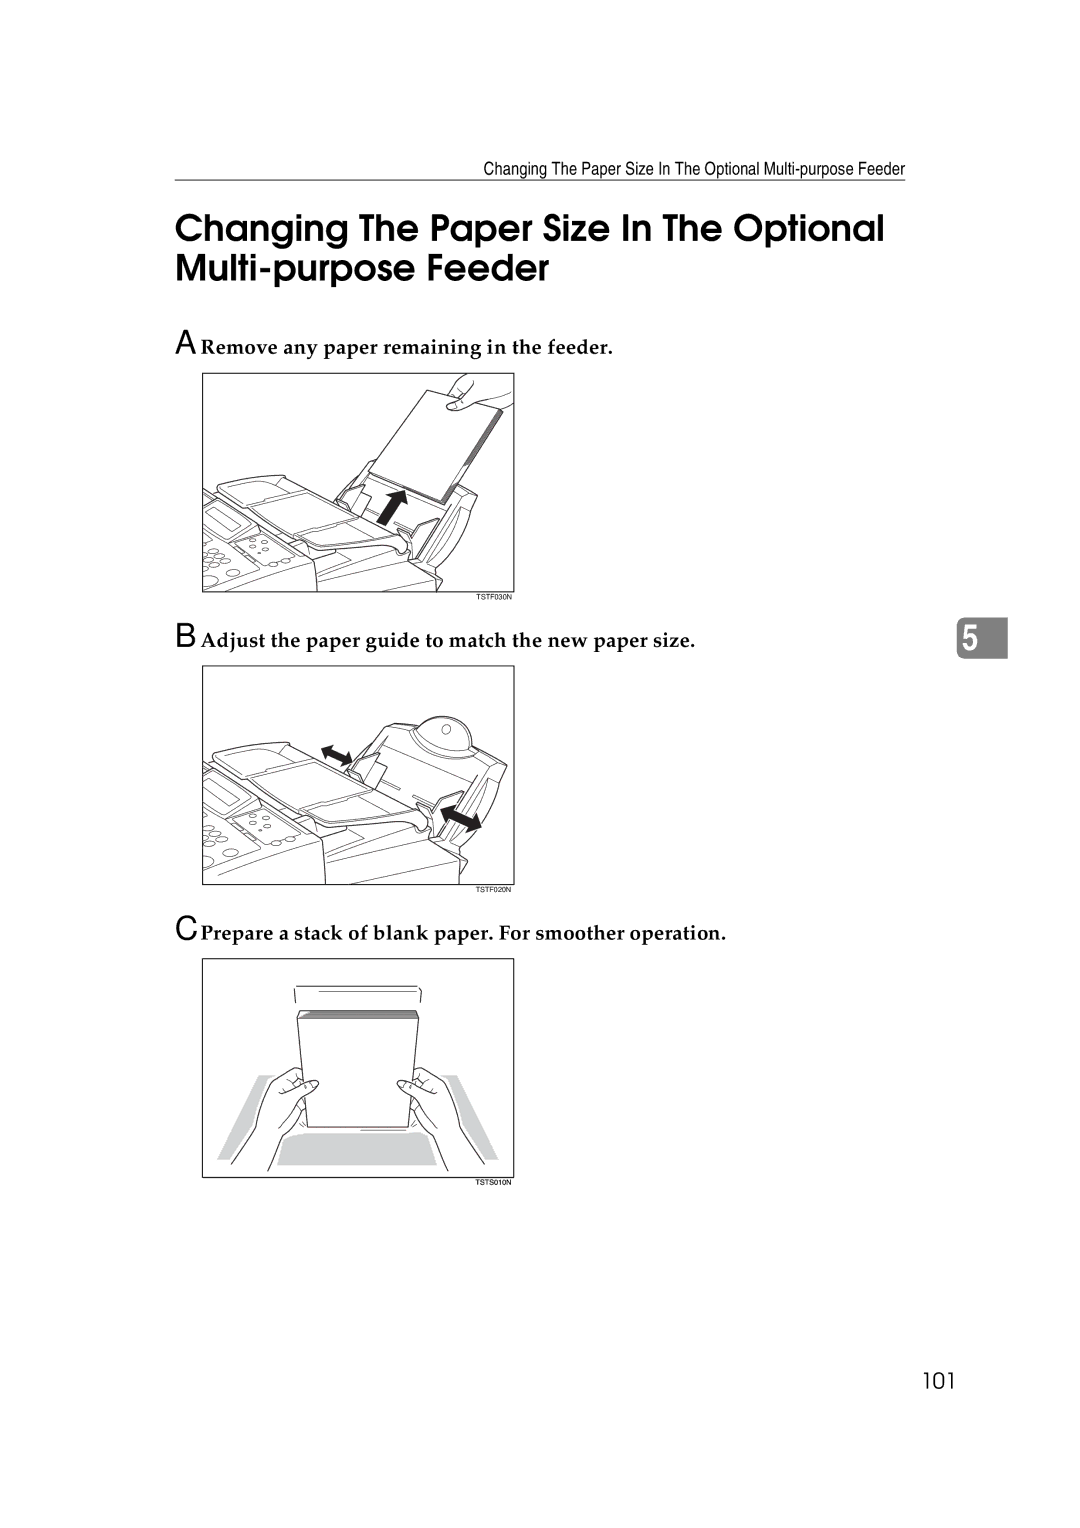 Ricoh H545 manual 101, Remove any paper remaining in the feeder, Adjust the paper guide to match the new paper size 